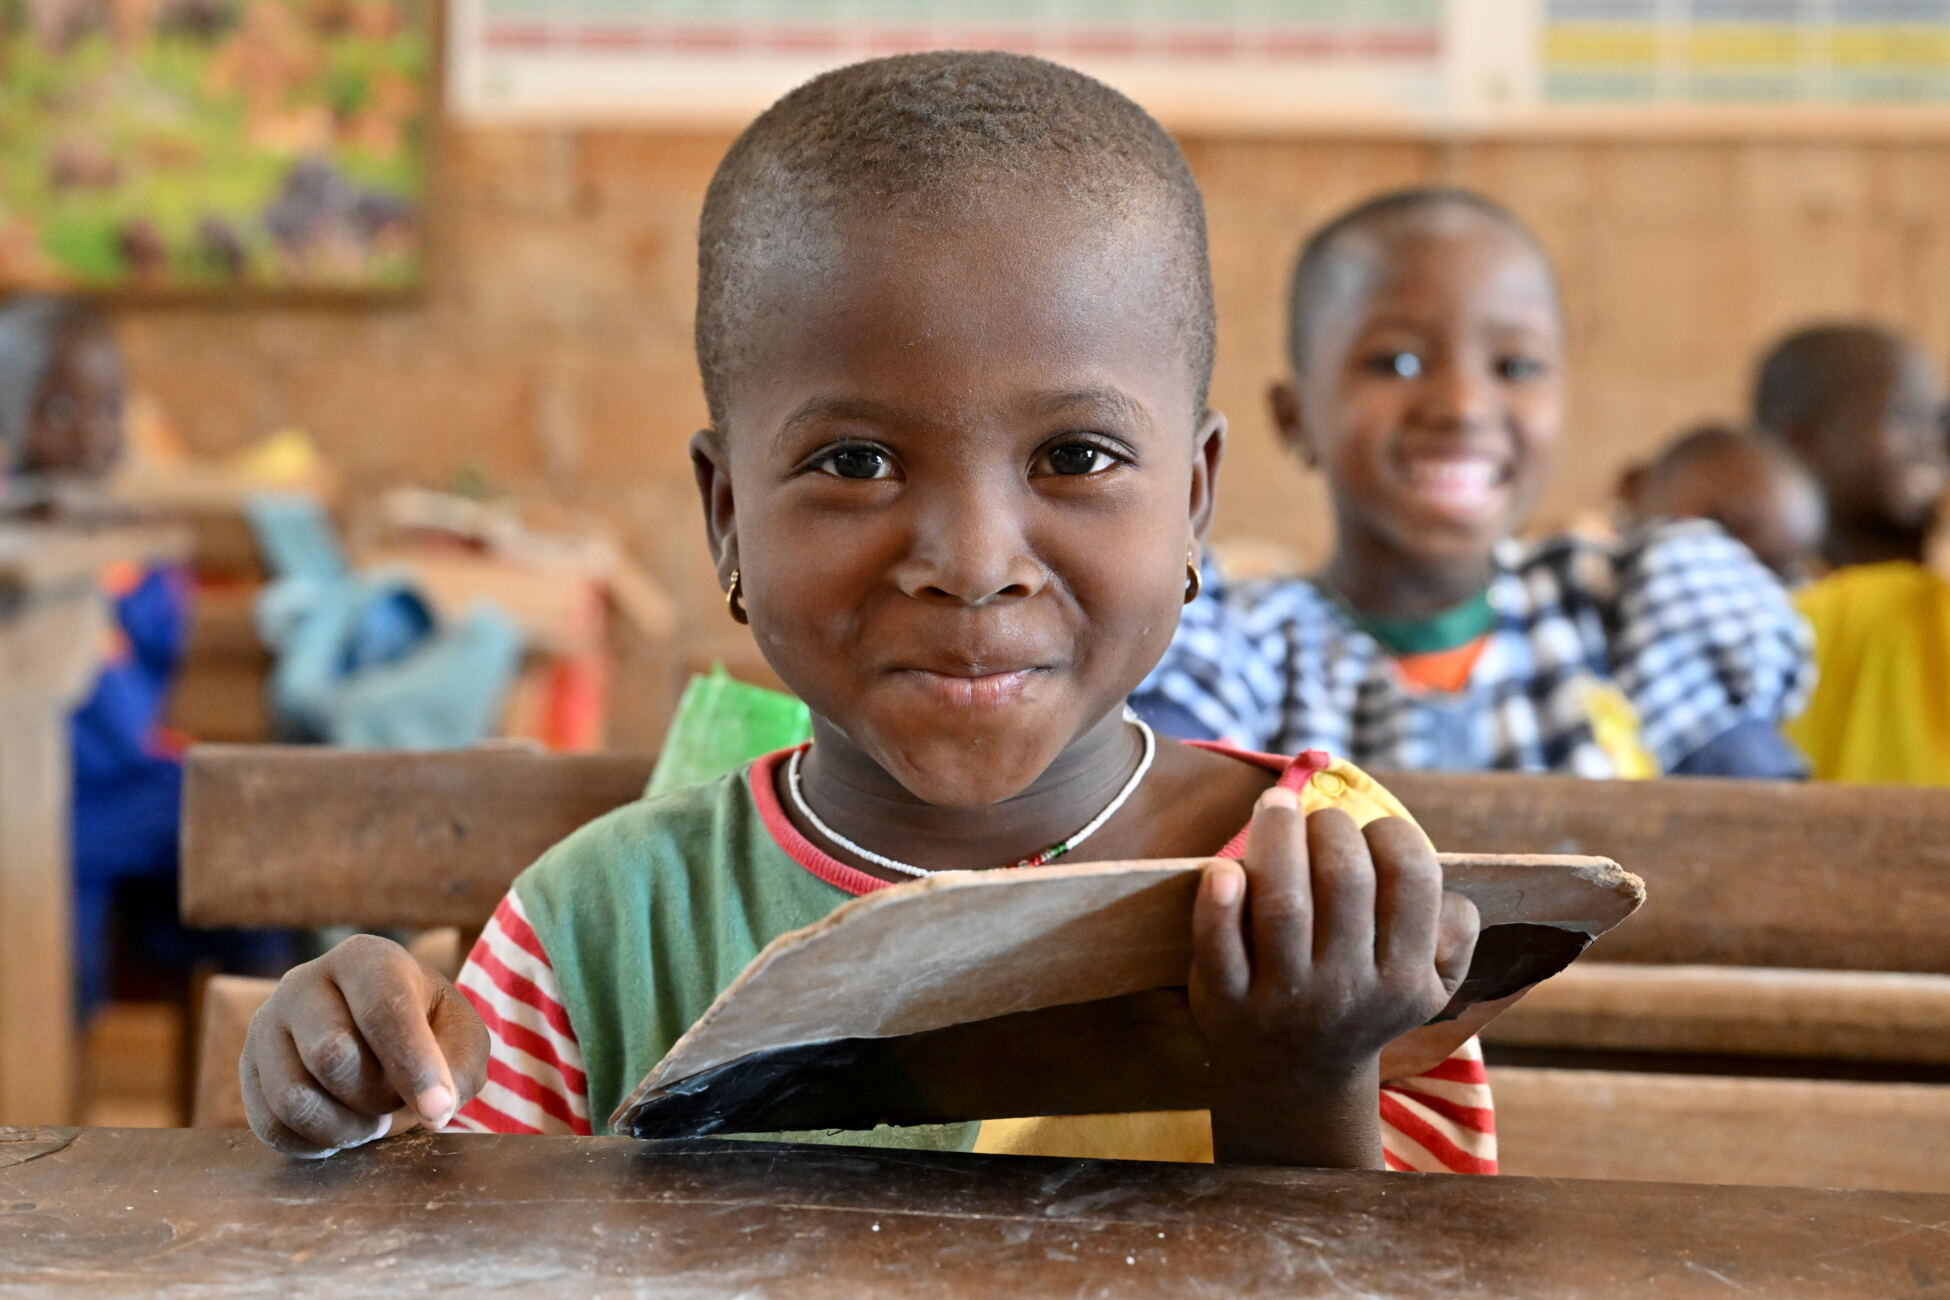 A young child looks up from her work and smiles at the camera from behind a wooden schooldesk.